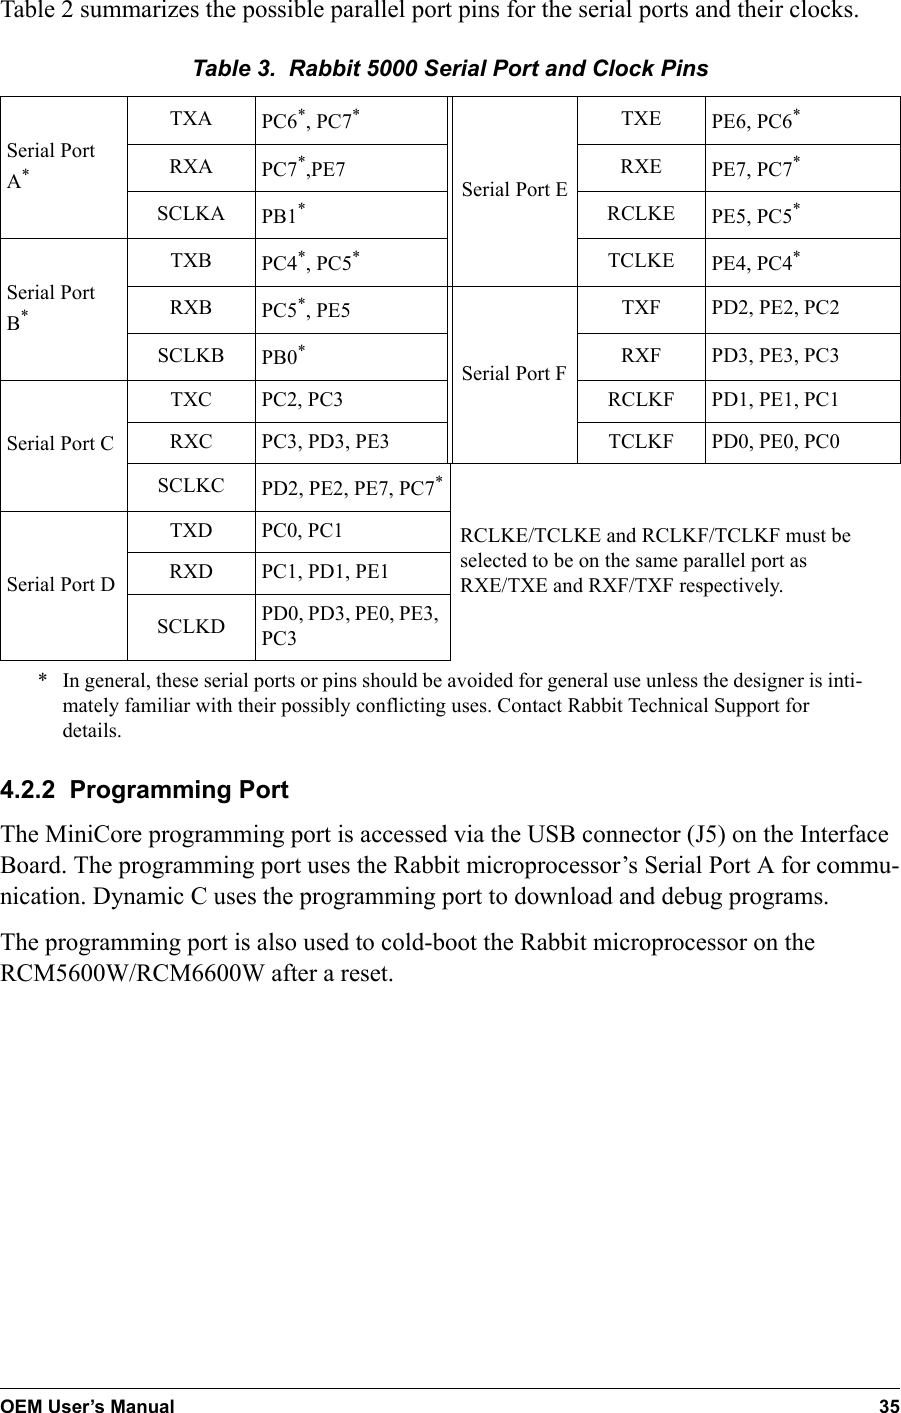 OEM User’s Manual 35Table 2 summarizes the possible parallel port pins for the serial ports and their clocks.Table 3.  Rabbit 5000 Serial Port and Clock PinsSerial Port A** In general, these serial ports or pins should be avoided for general use unless the designer is inti-mately familiar with their possibly conflicting uses. Contact Rabbit Technical Support for details.TXA PC6*, PC7*Serial Port ETXE PE6, PC6*RXA PC7*,PE7 RXE PE7, PC7*SCLKA PB1*RCLKE PE5, PC5*Serial Port B*TXB PC4*, PC5*TCLKE PE4, PC4*RXB PC5*, PE5Serial Port FTXF PD2, PE2, PC2SCLKB PB0*RXF PD3, PE3, PC3Serial Port CTXC PC2, PC3 RCLKF PD1, PE1, PC1RXC PC3, PD3, PE3 TCLKF PD0, PE0, PC0SCLKC PD2, PE2, PE7, PC7*RCLKE/TCLKE and RCLKF/TCLKF must be selected to be on the same parallel port as RXE/TXE and RXF/TXF respectively.Serial Port DTXD PC0, PC1RXD PC1, PD1, PE1SCLKD PD0, PD3, PE0, PE3, PC34.2.2  Programming PortThe MiniCore programming port is accessed via the USB connector (J5) on the Interface Board. The programming port uses the Rabbit microprocessor’s Serial Port A for commu-nication. Dynamic C uses the programming port to download and debug programs.The programming port is also used to cold-boot the Rabbit microprocessor on the RCM5600W/RCM6600W after a reset.